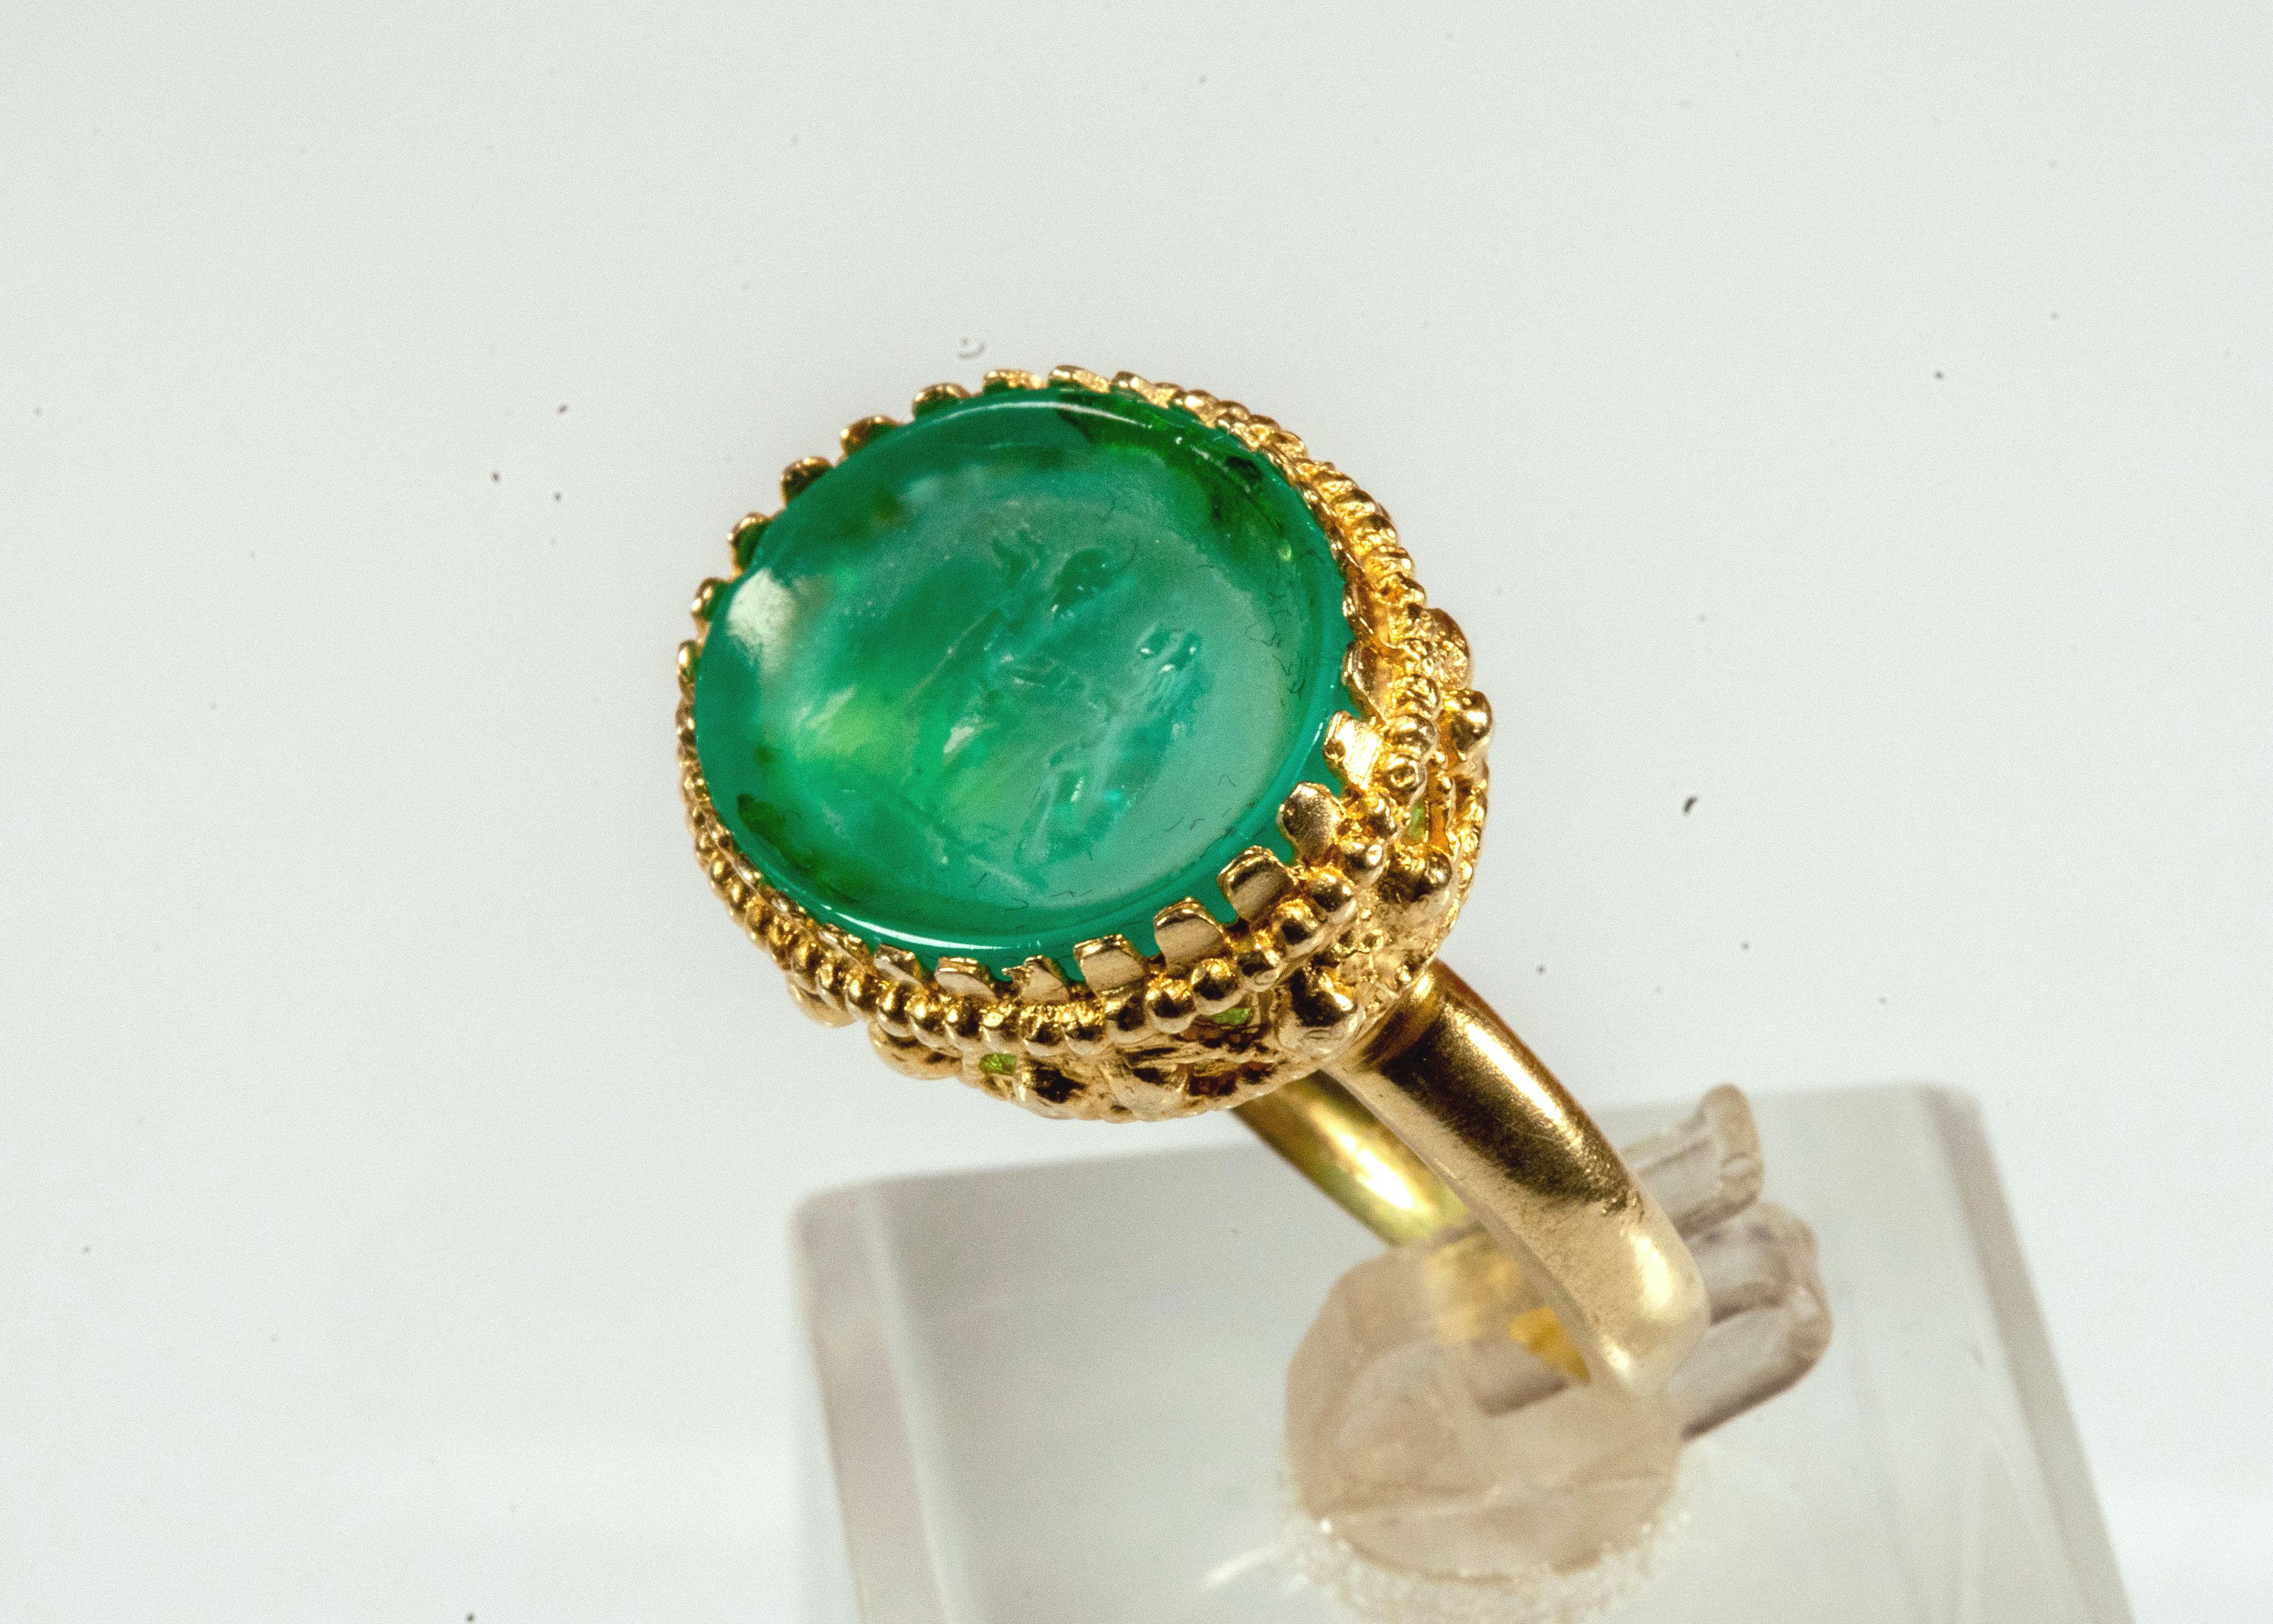 Pretty ring in 925 silver with oval cameo made of green glass paste, faithful reproduction of Etruscan jewelry.
The decorative technique with which Etruscans and ancient Romans made glass paste jewels, on which they depicted scenes of everyday life